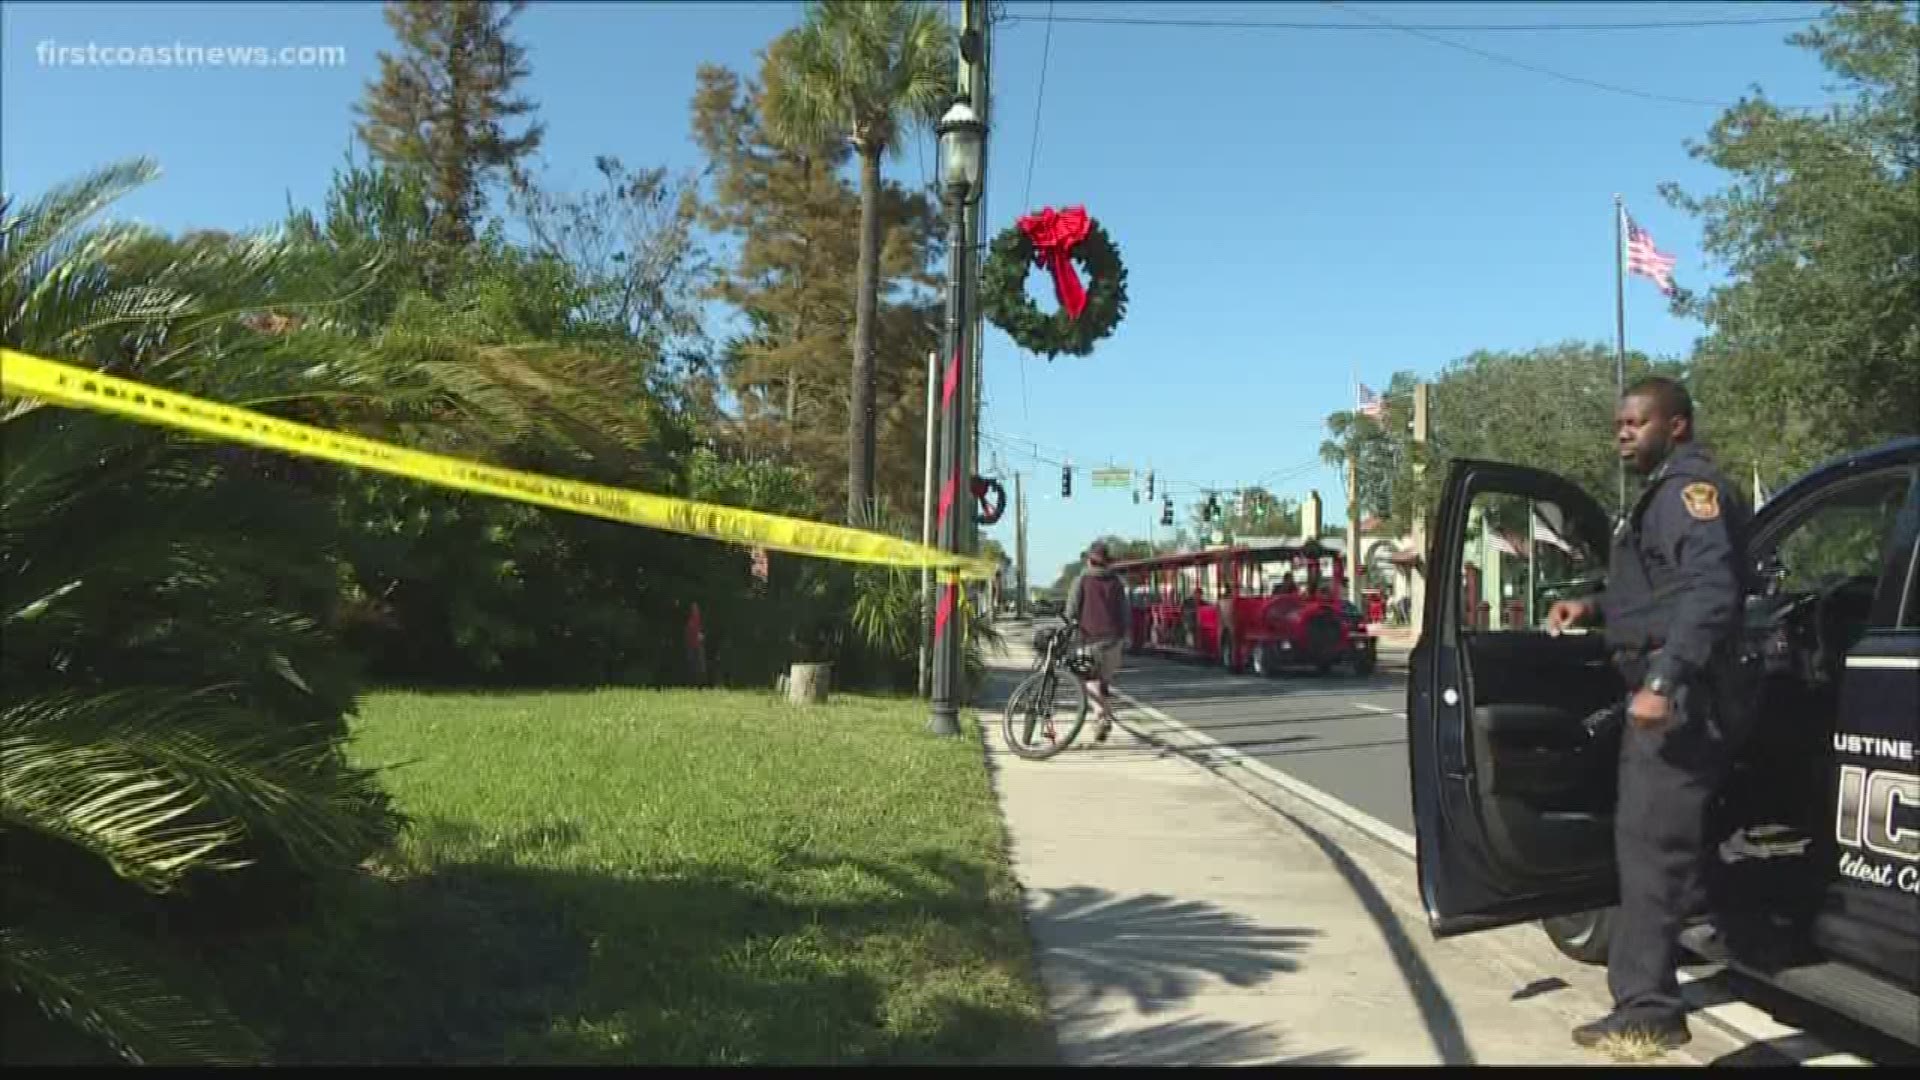 A homeless man died alone in the middle of busy downtown St. Augustine.